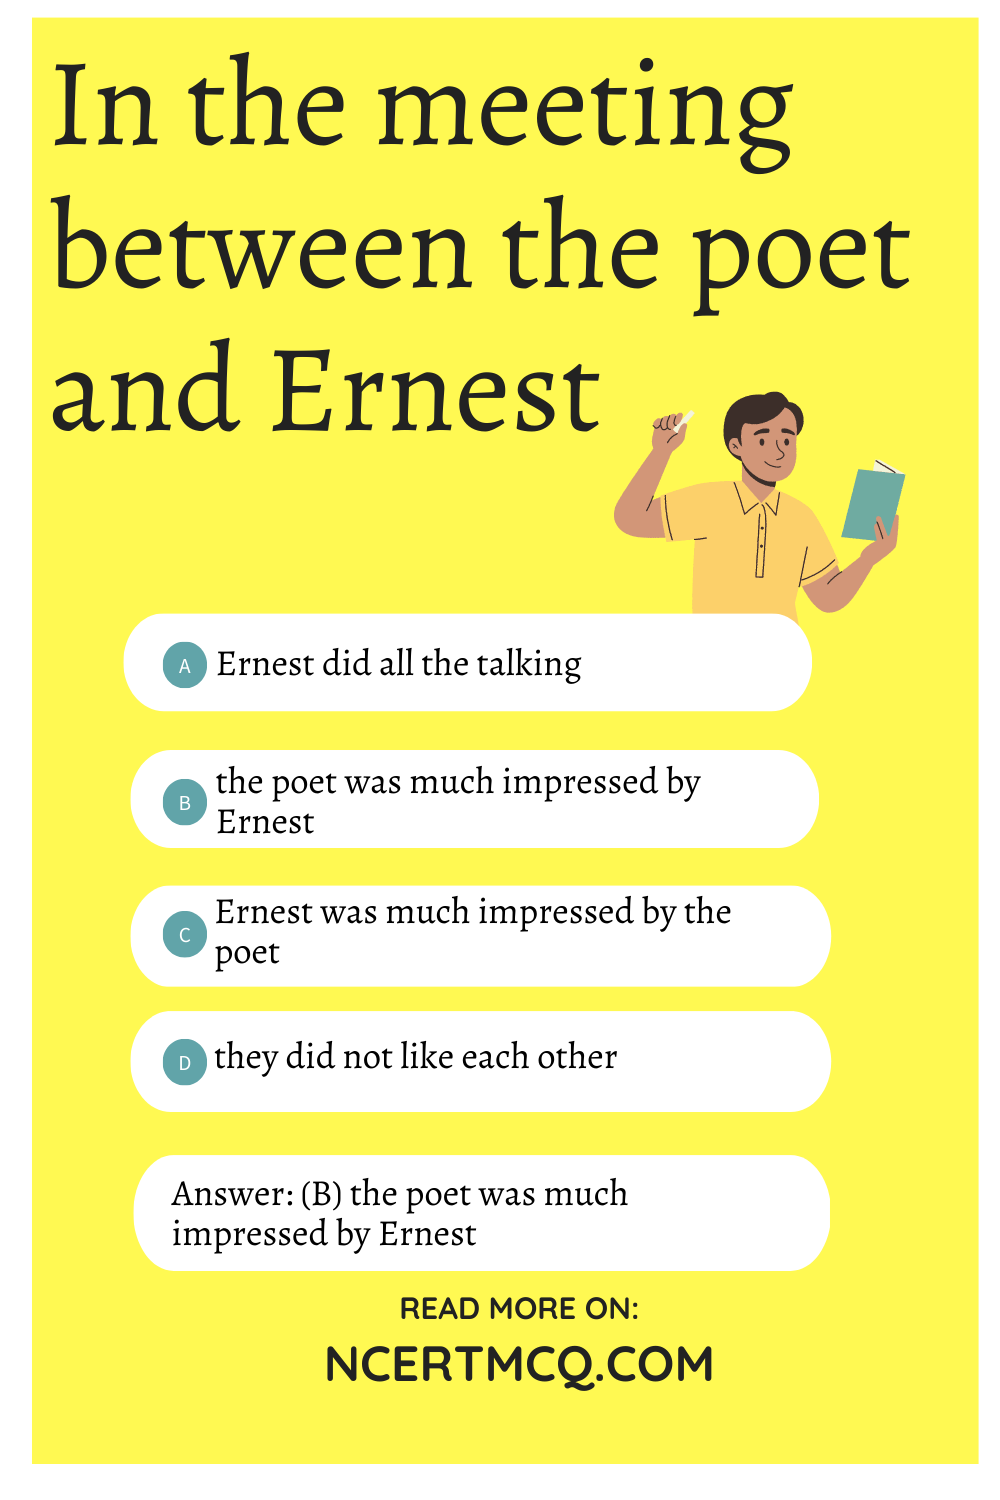 In the meeting between the poet and Ernest